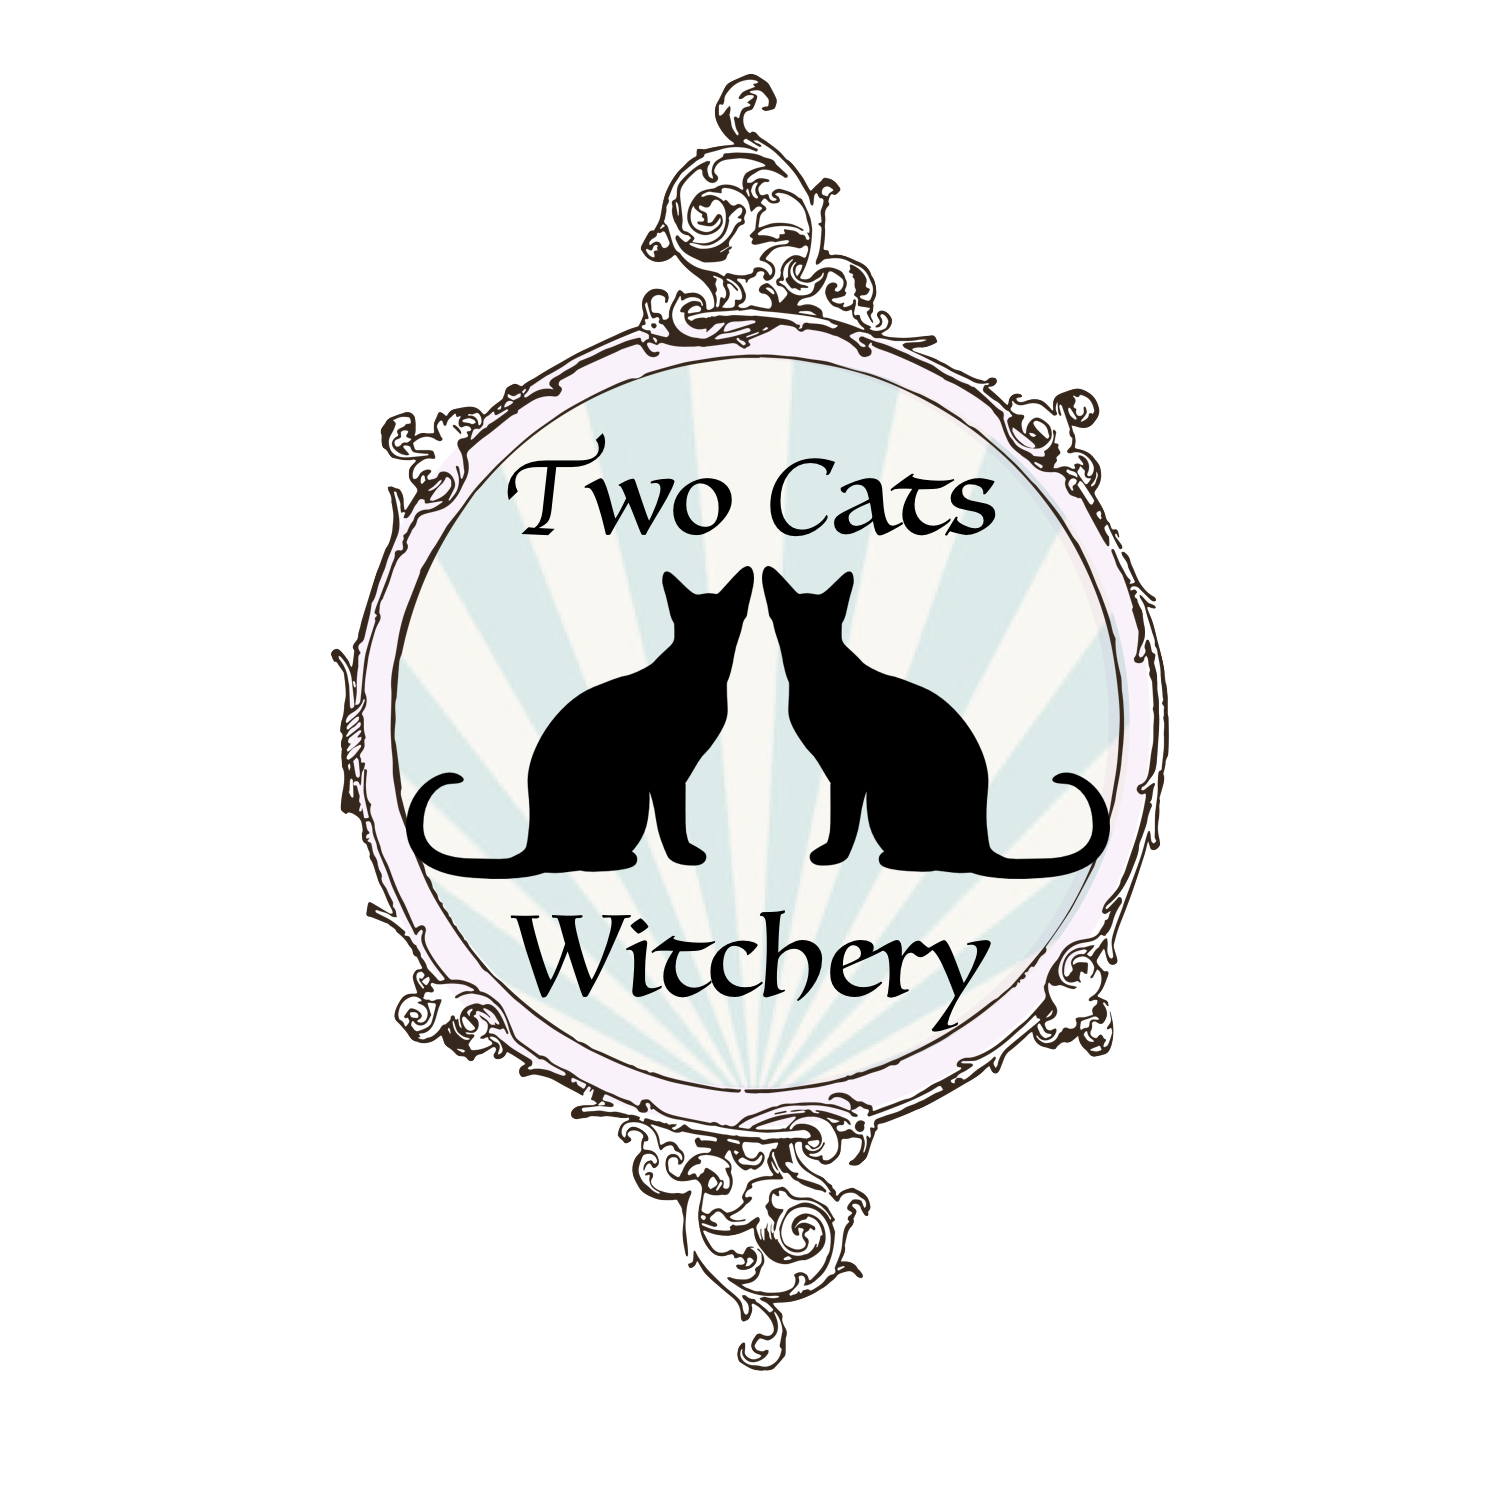 two cats witchery logo